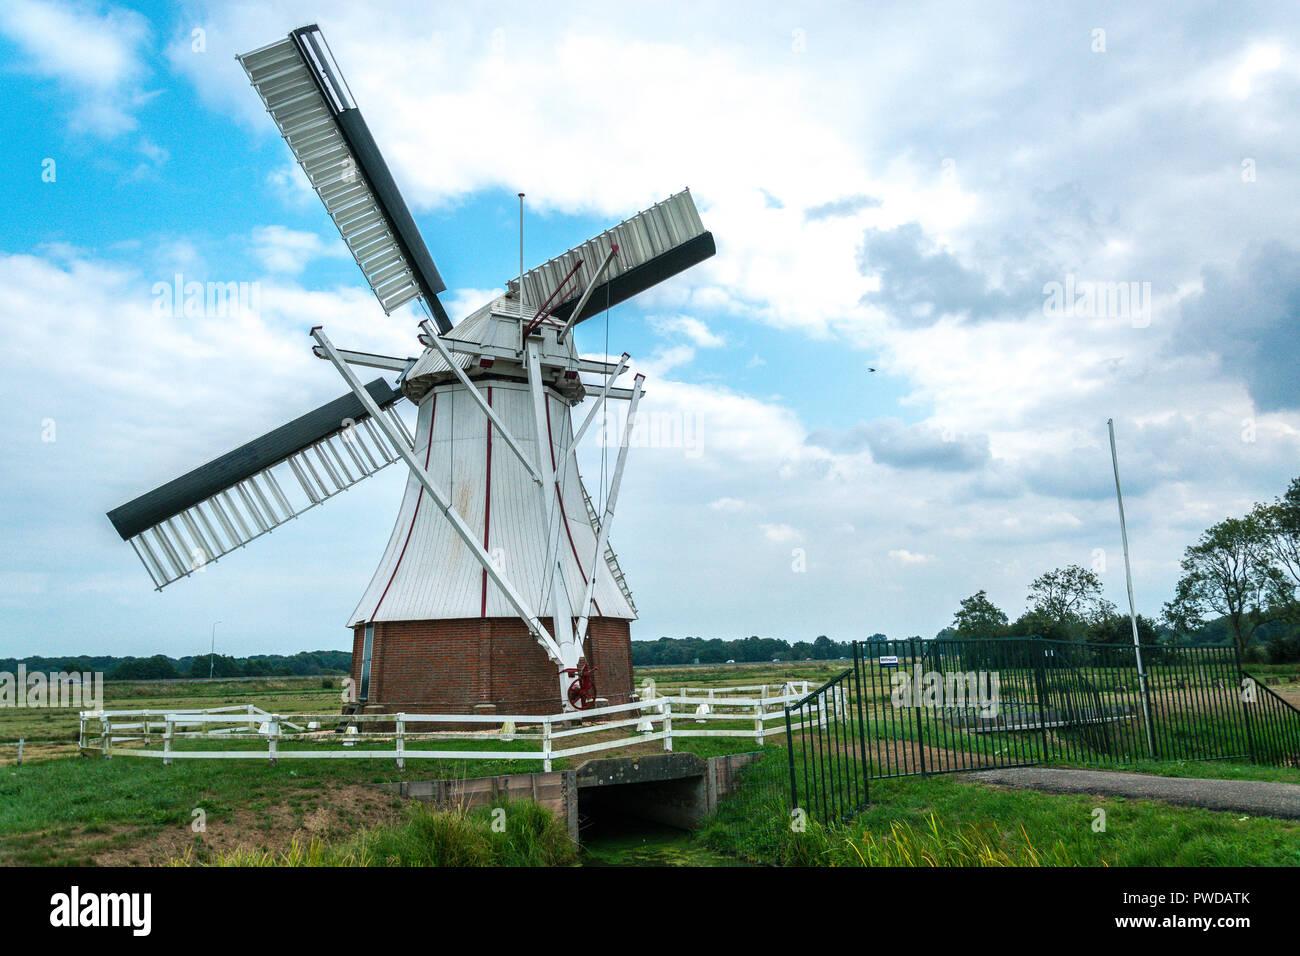 GRONINGEN, NETHERLANDS, AUGUST 15, 2018: The White Mill (Witte Molen) at Groningen, a typical Dutch historic mill in the north of The Netherlands Stock Photo